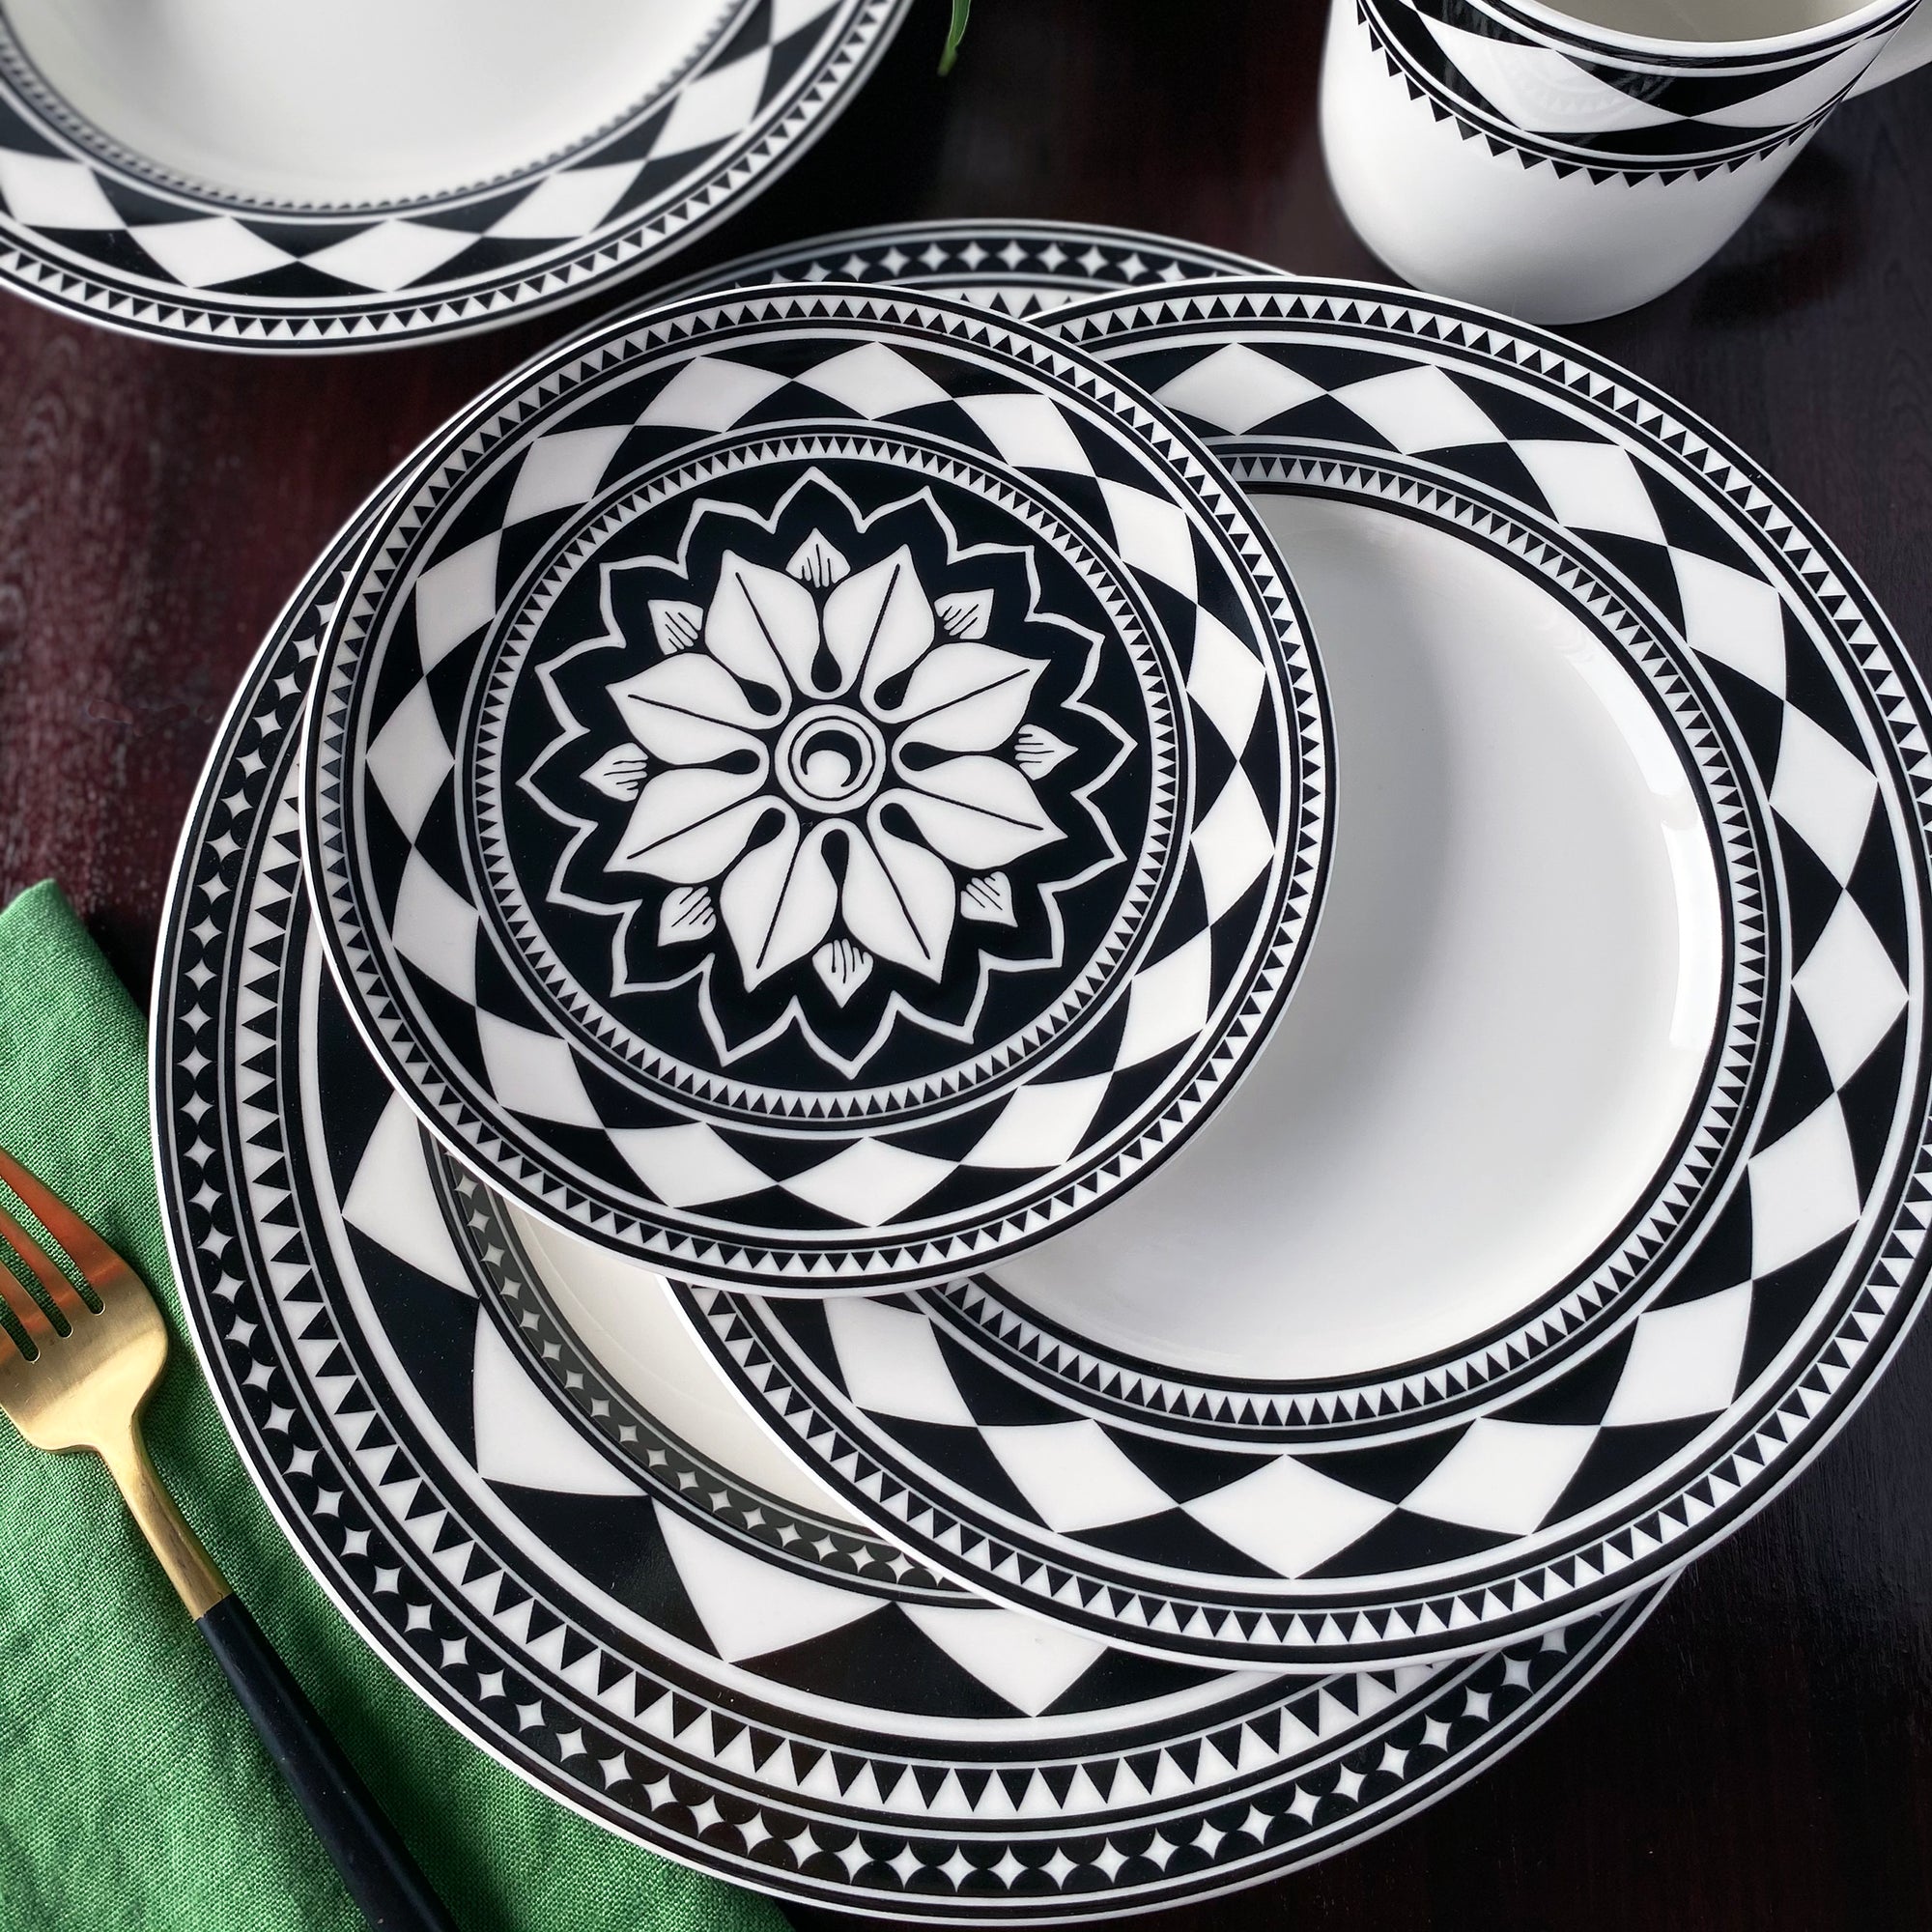 A Fez Rimmed Dinner Plate by Caskata Artisanal Home, a white plate with a wide rim, showcasing a black and white geometric pattern reminiscent of Moroccan designs.